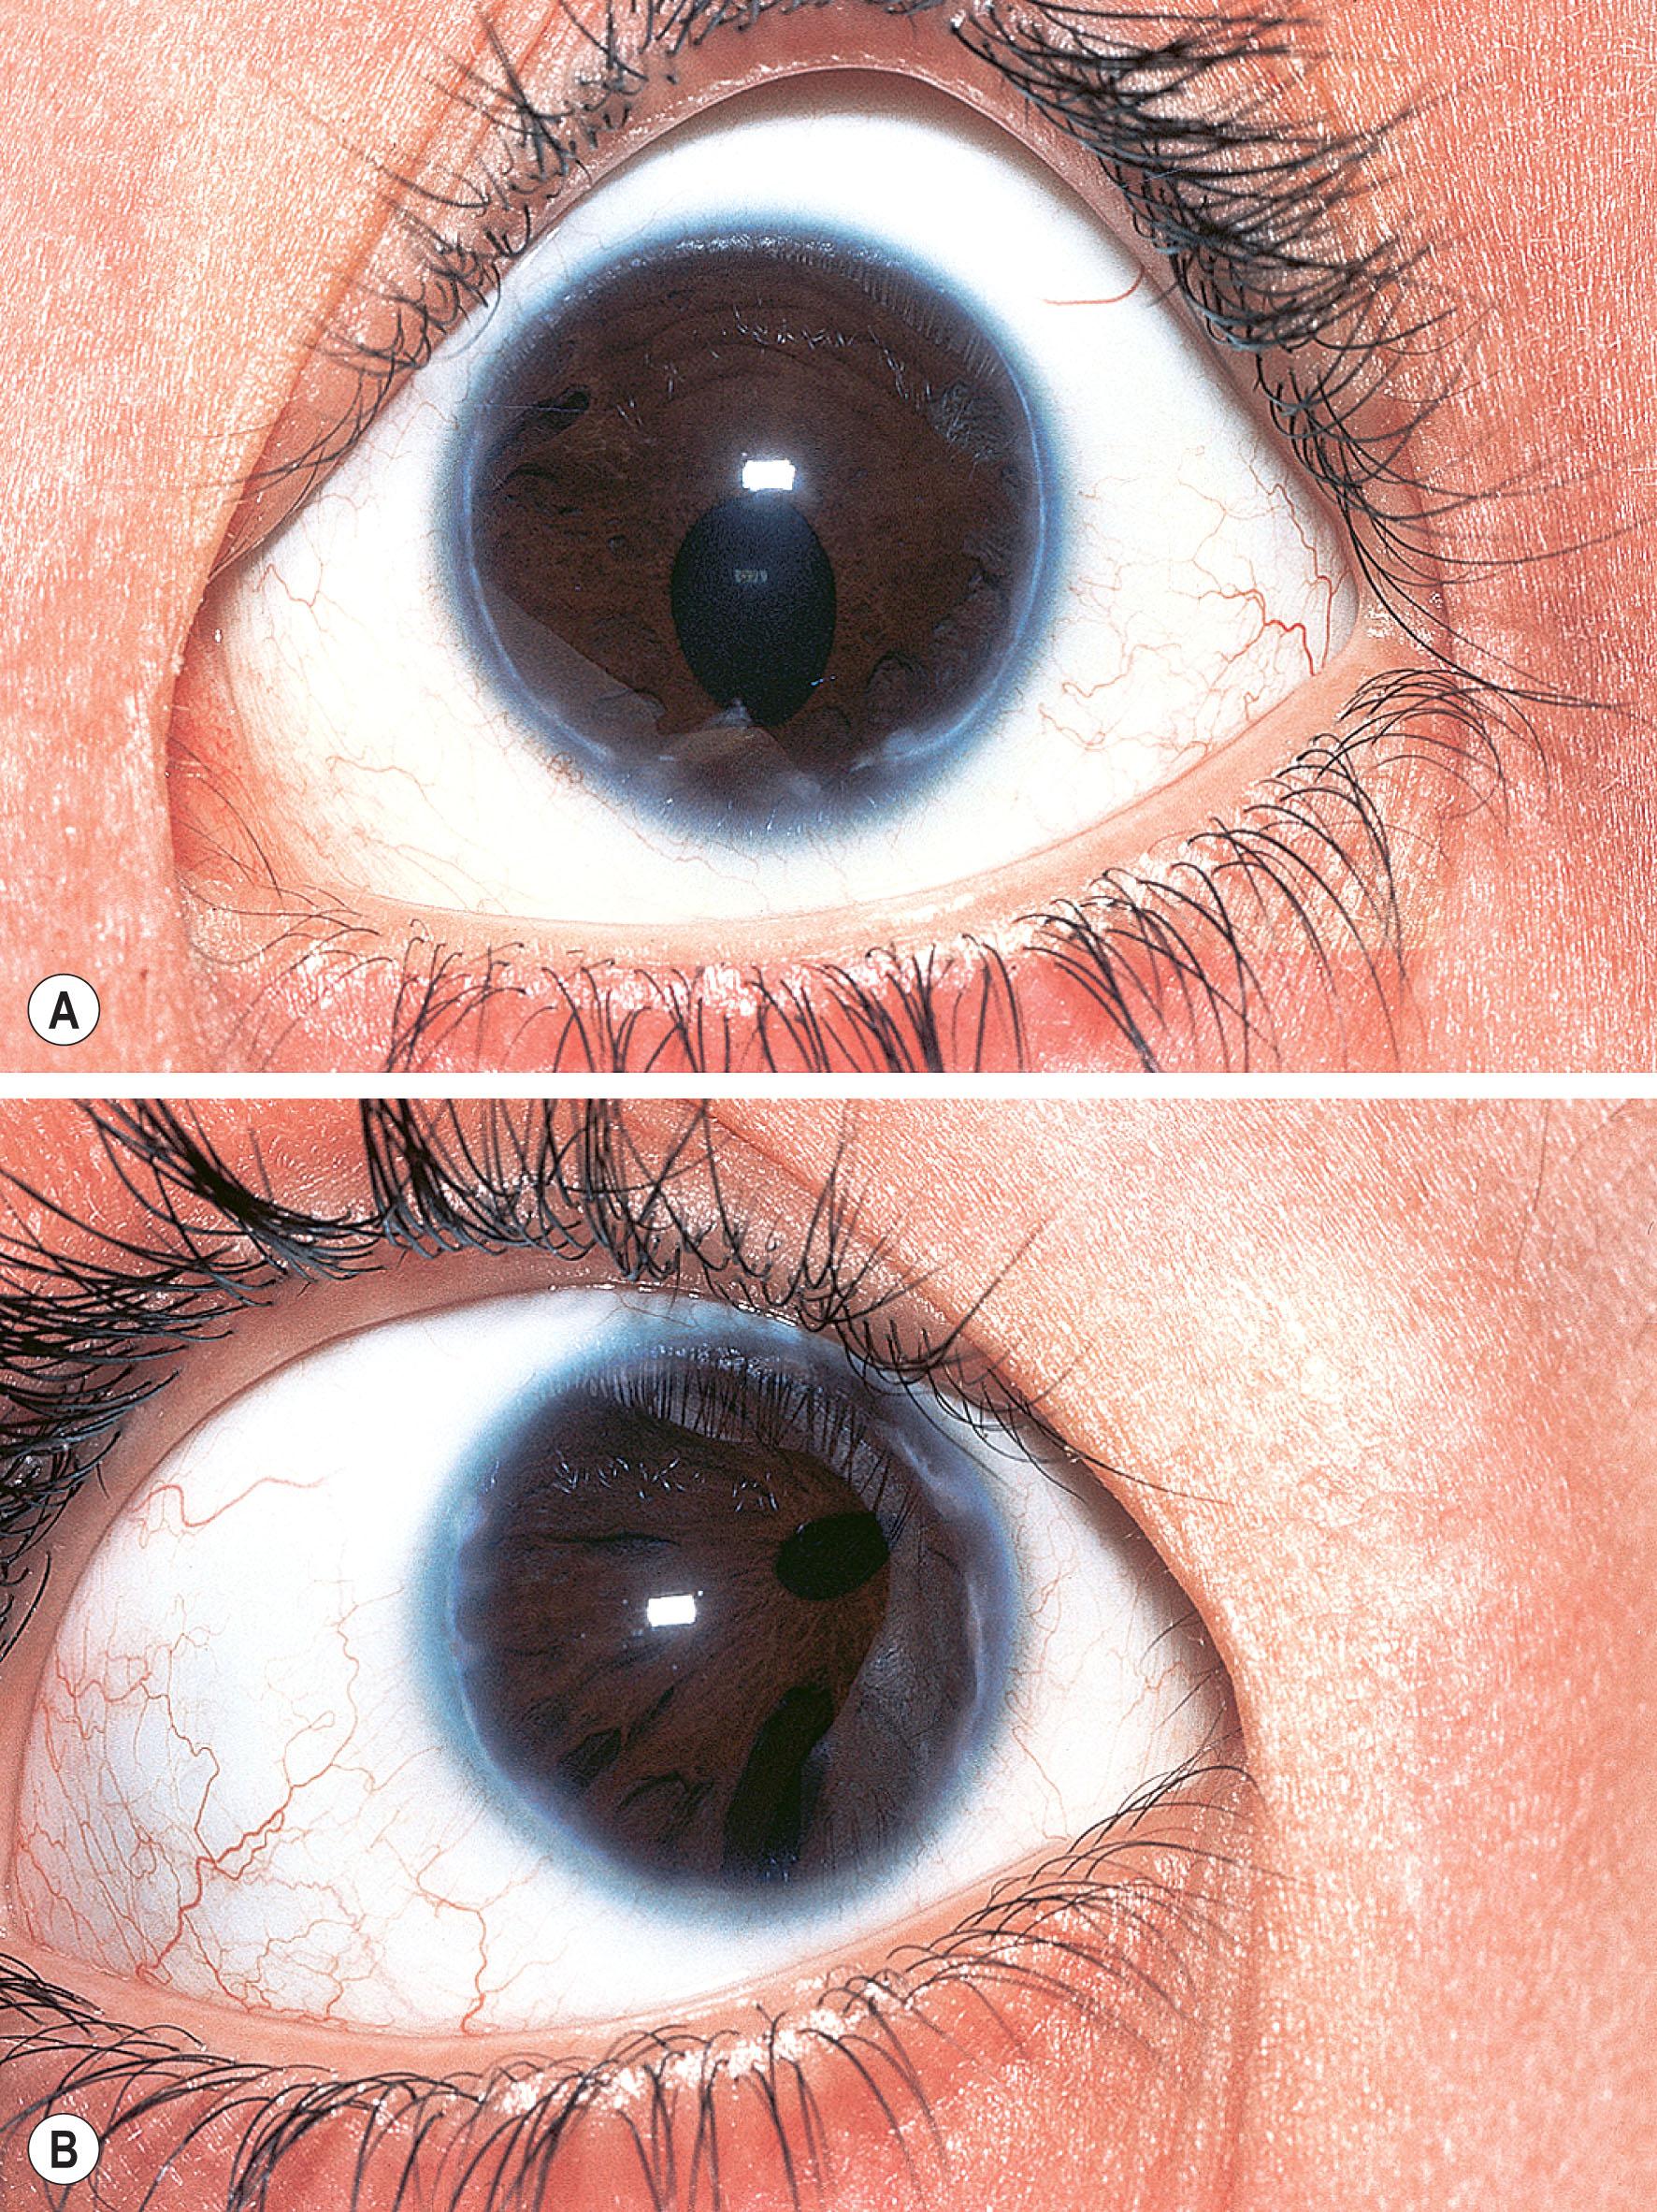 Fig. 31.2, Axenfeld–Rieger anomaly. There is iris hypoplasia, posterior embryotoxon, pseudopolycoria (A), and corectopia with the pupil drawn nasally (B).